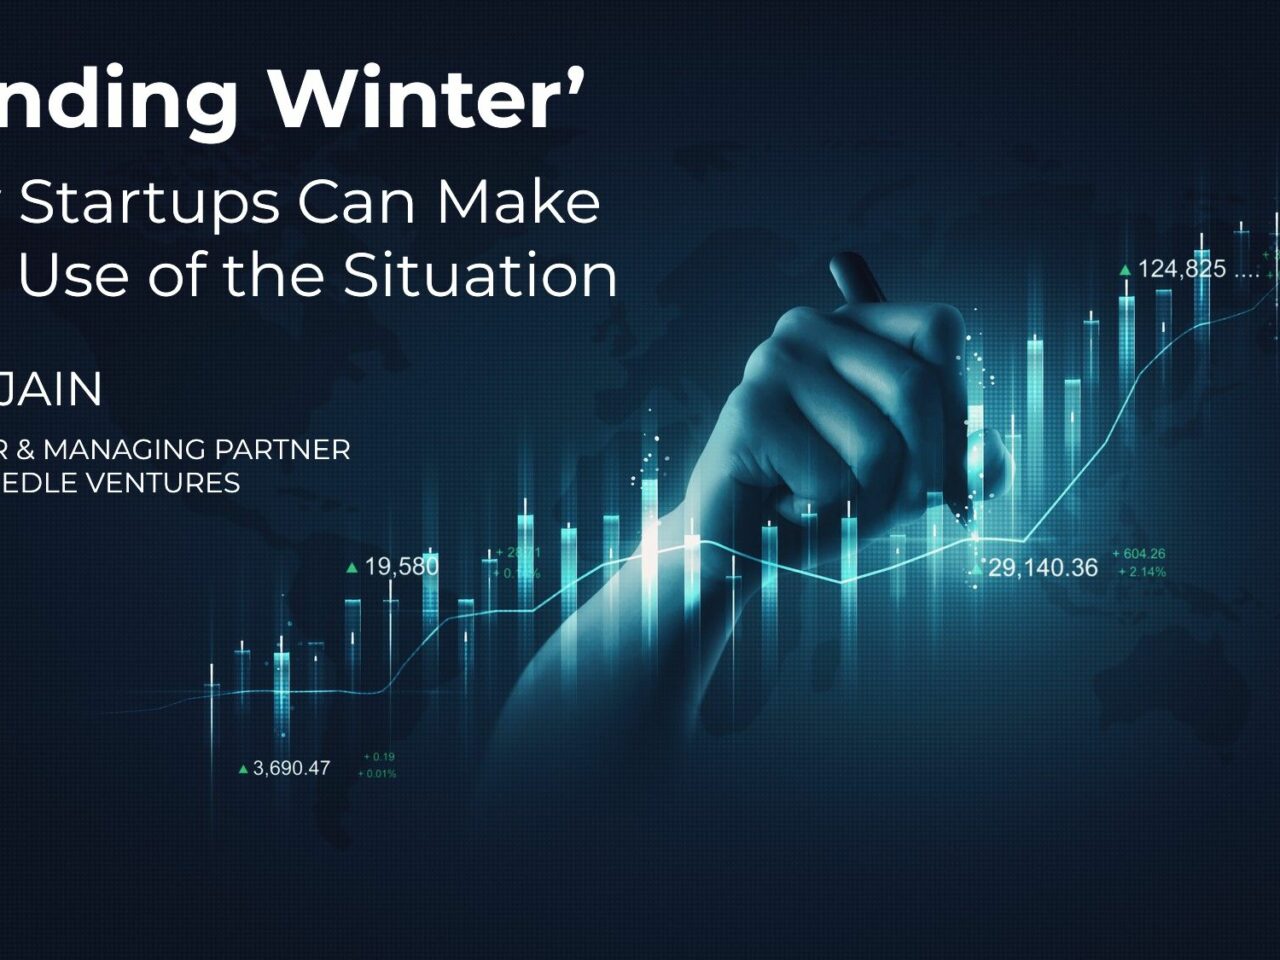 Funding Winter – How Startups Can Make Best Use of the Situation